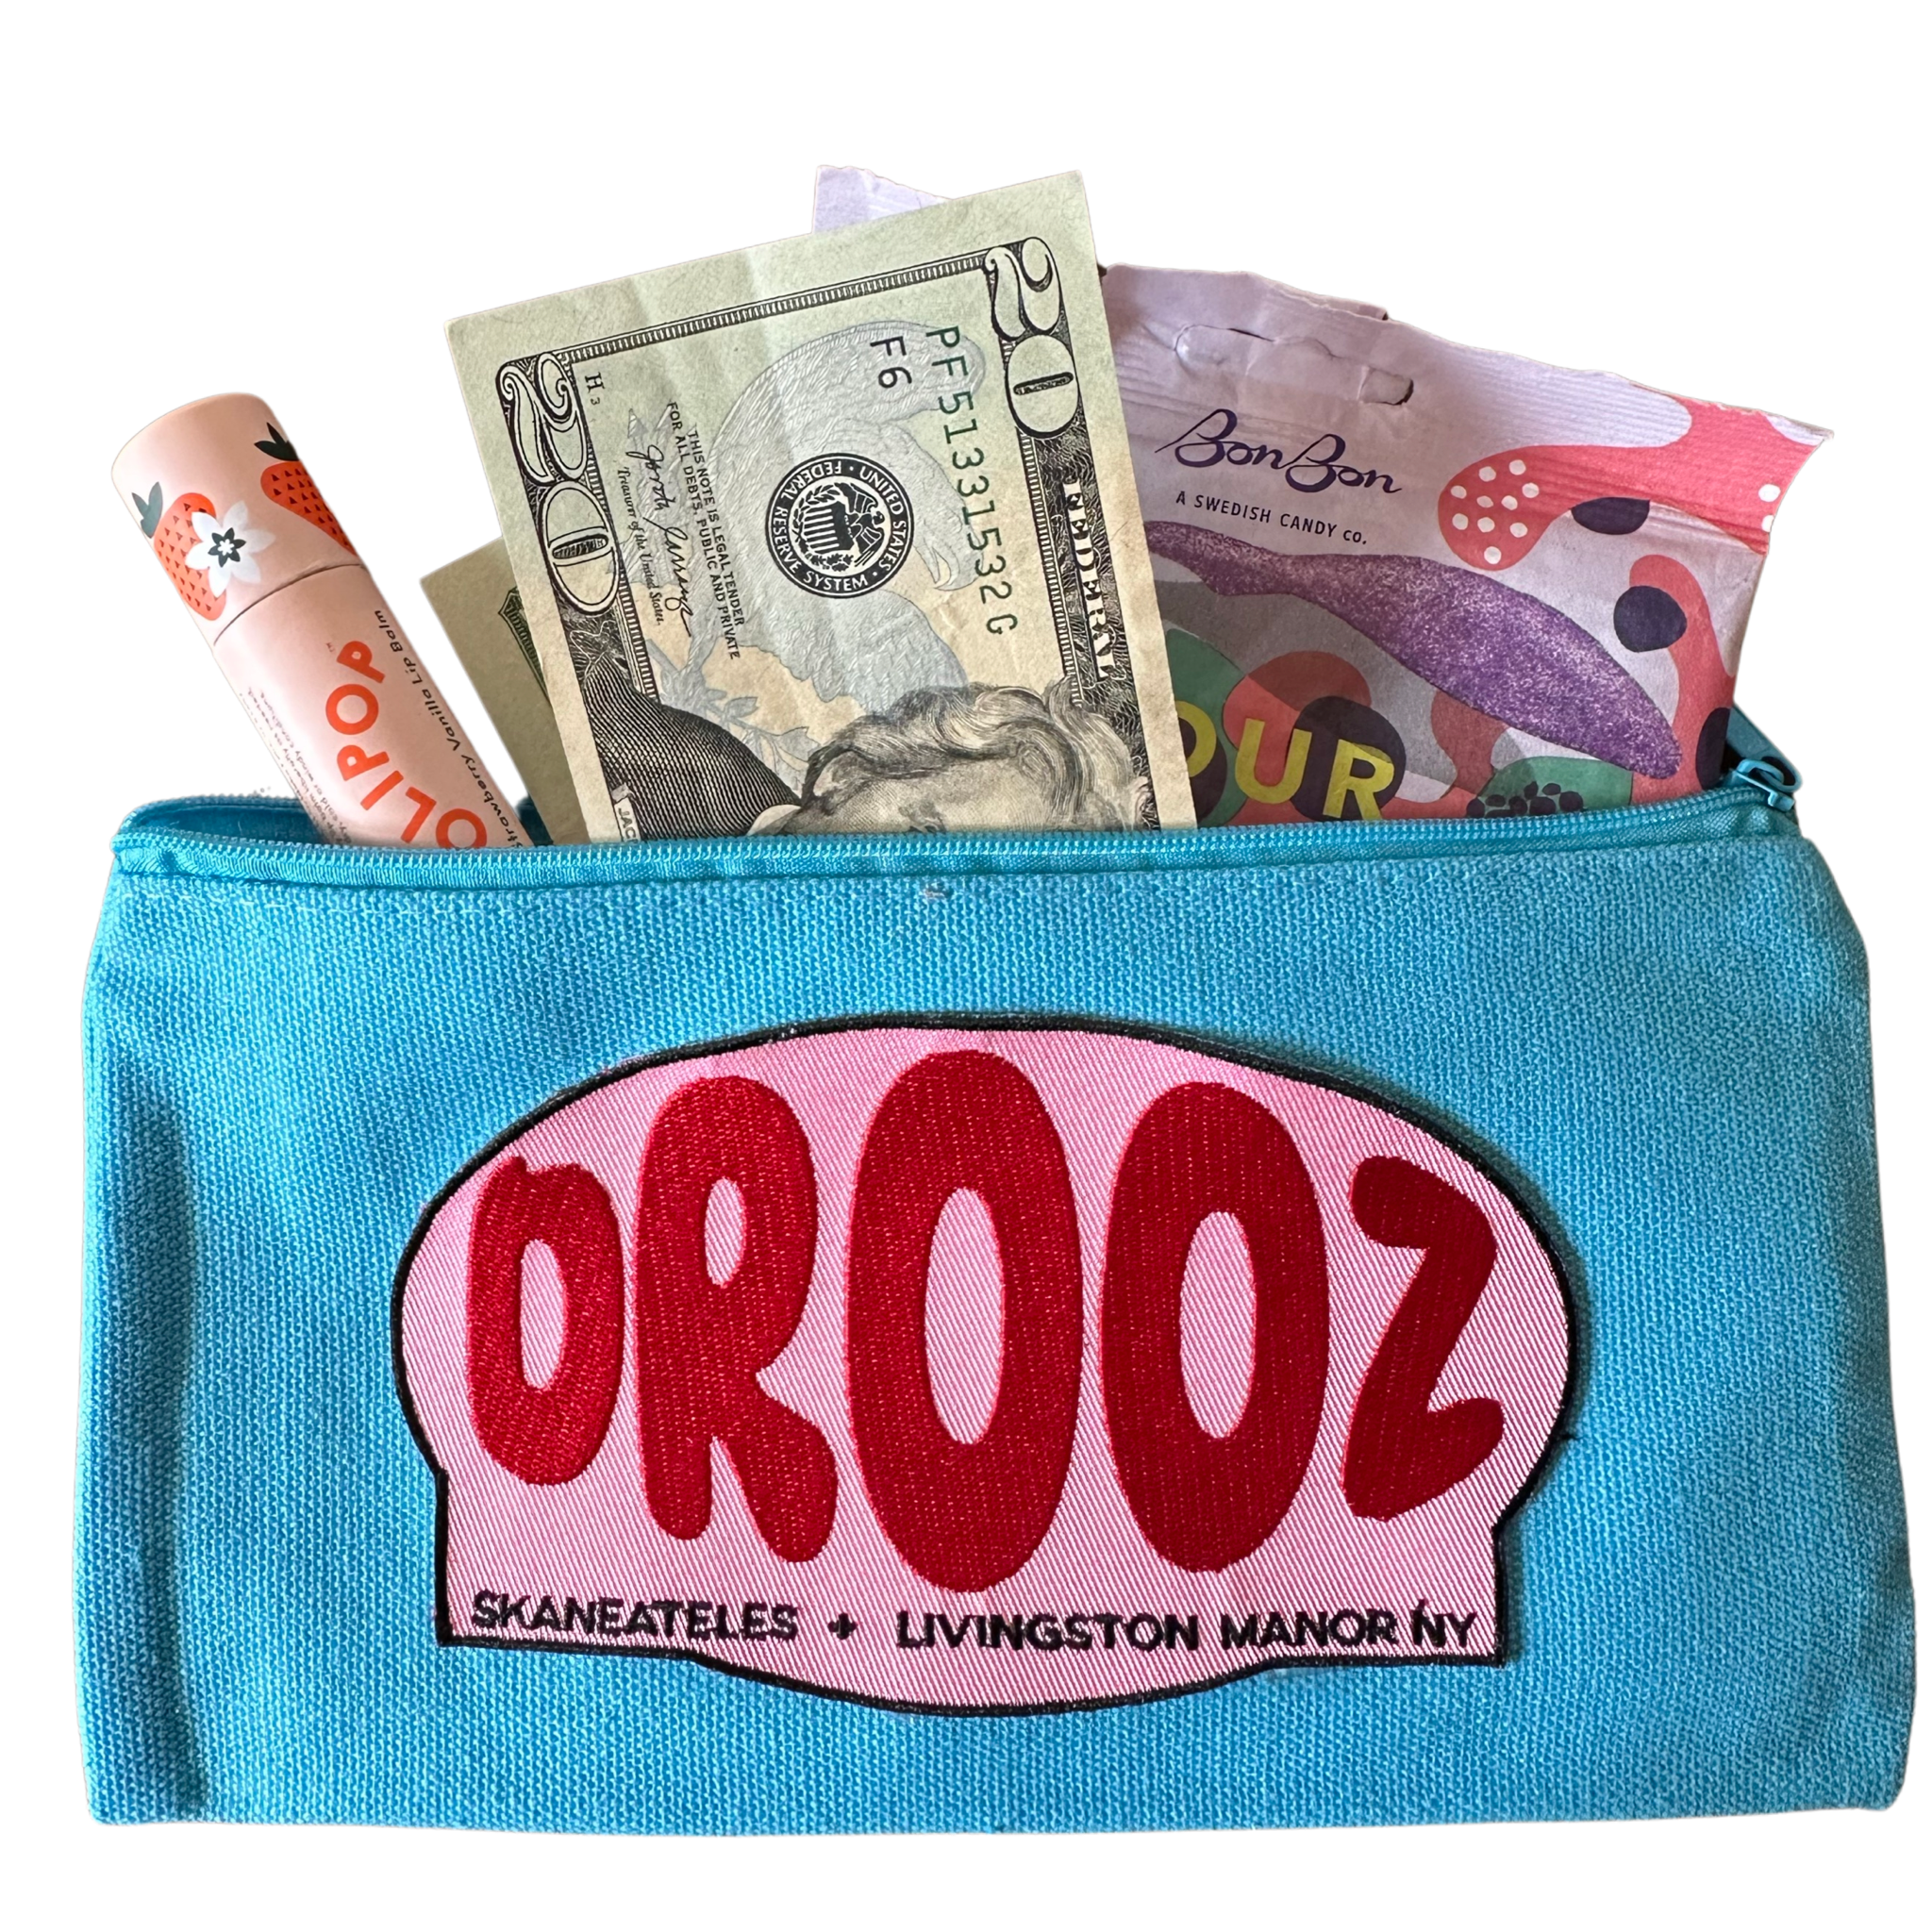 DROOZ canvas zip pouch